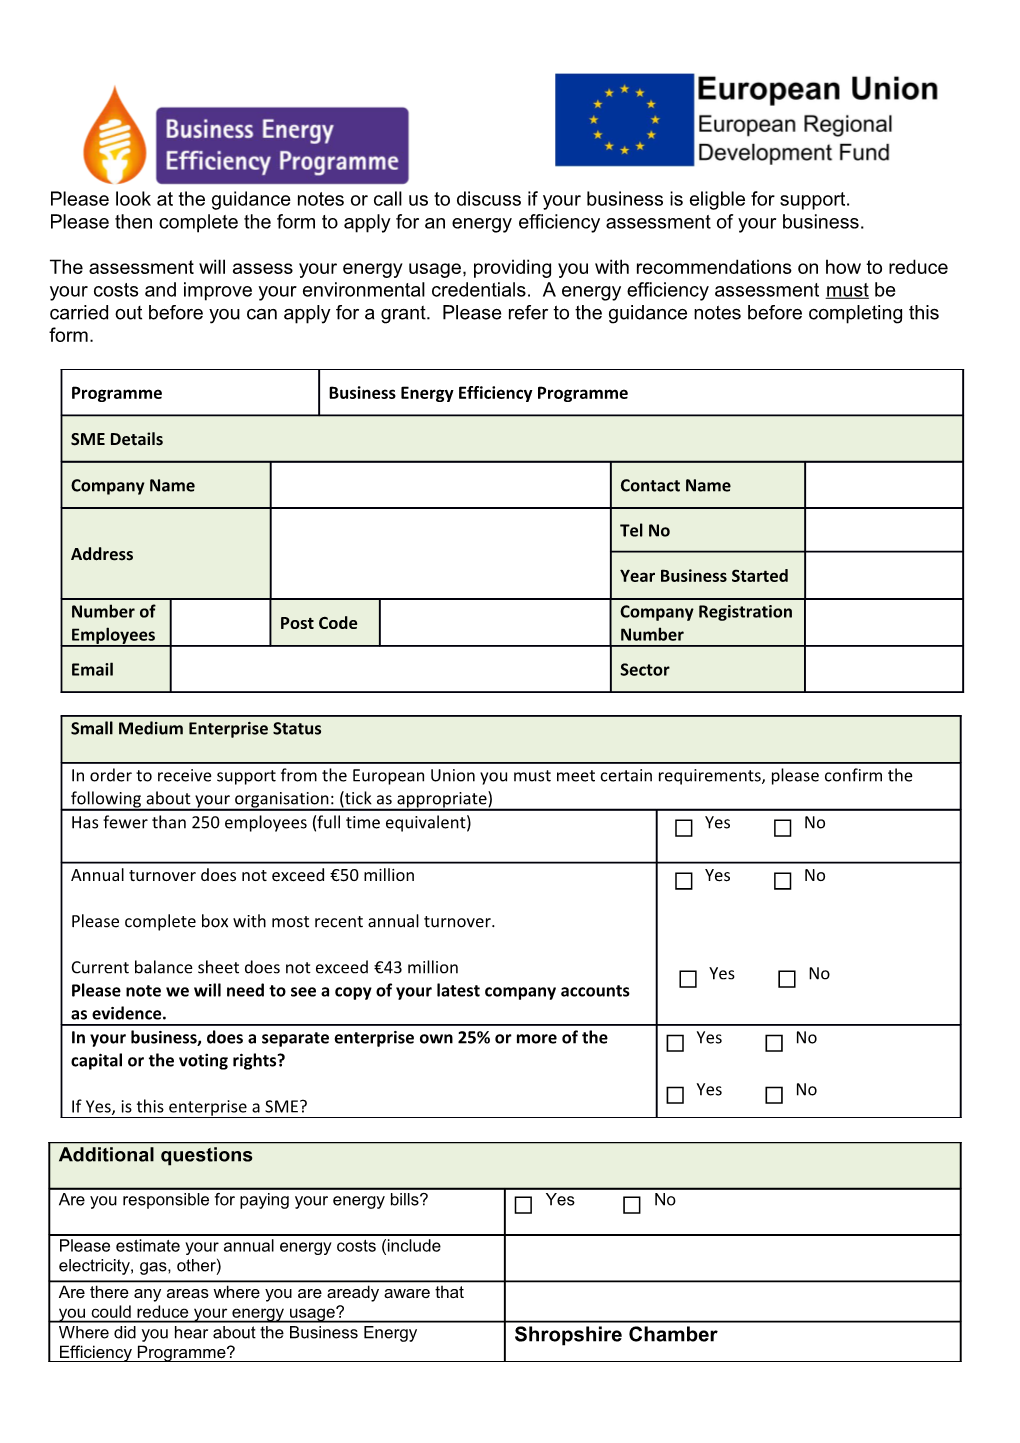 Please Then Complete the Form to Apply for Anenergyefficiency Assessment of Your Business